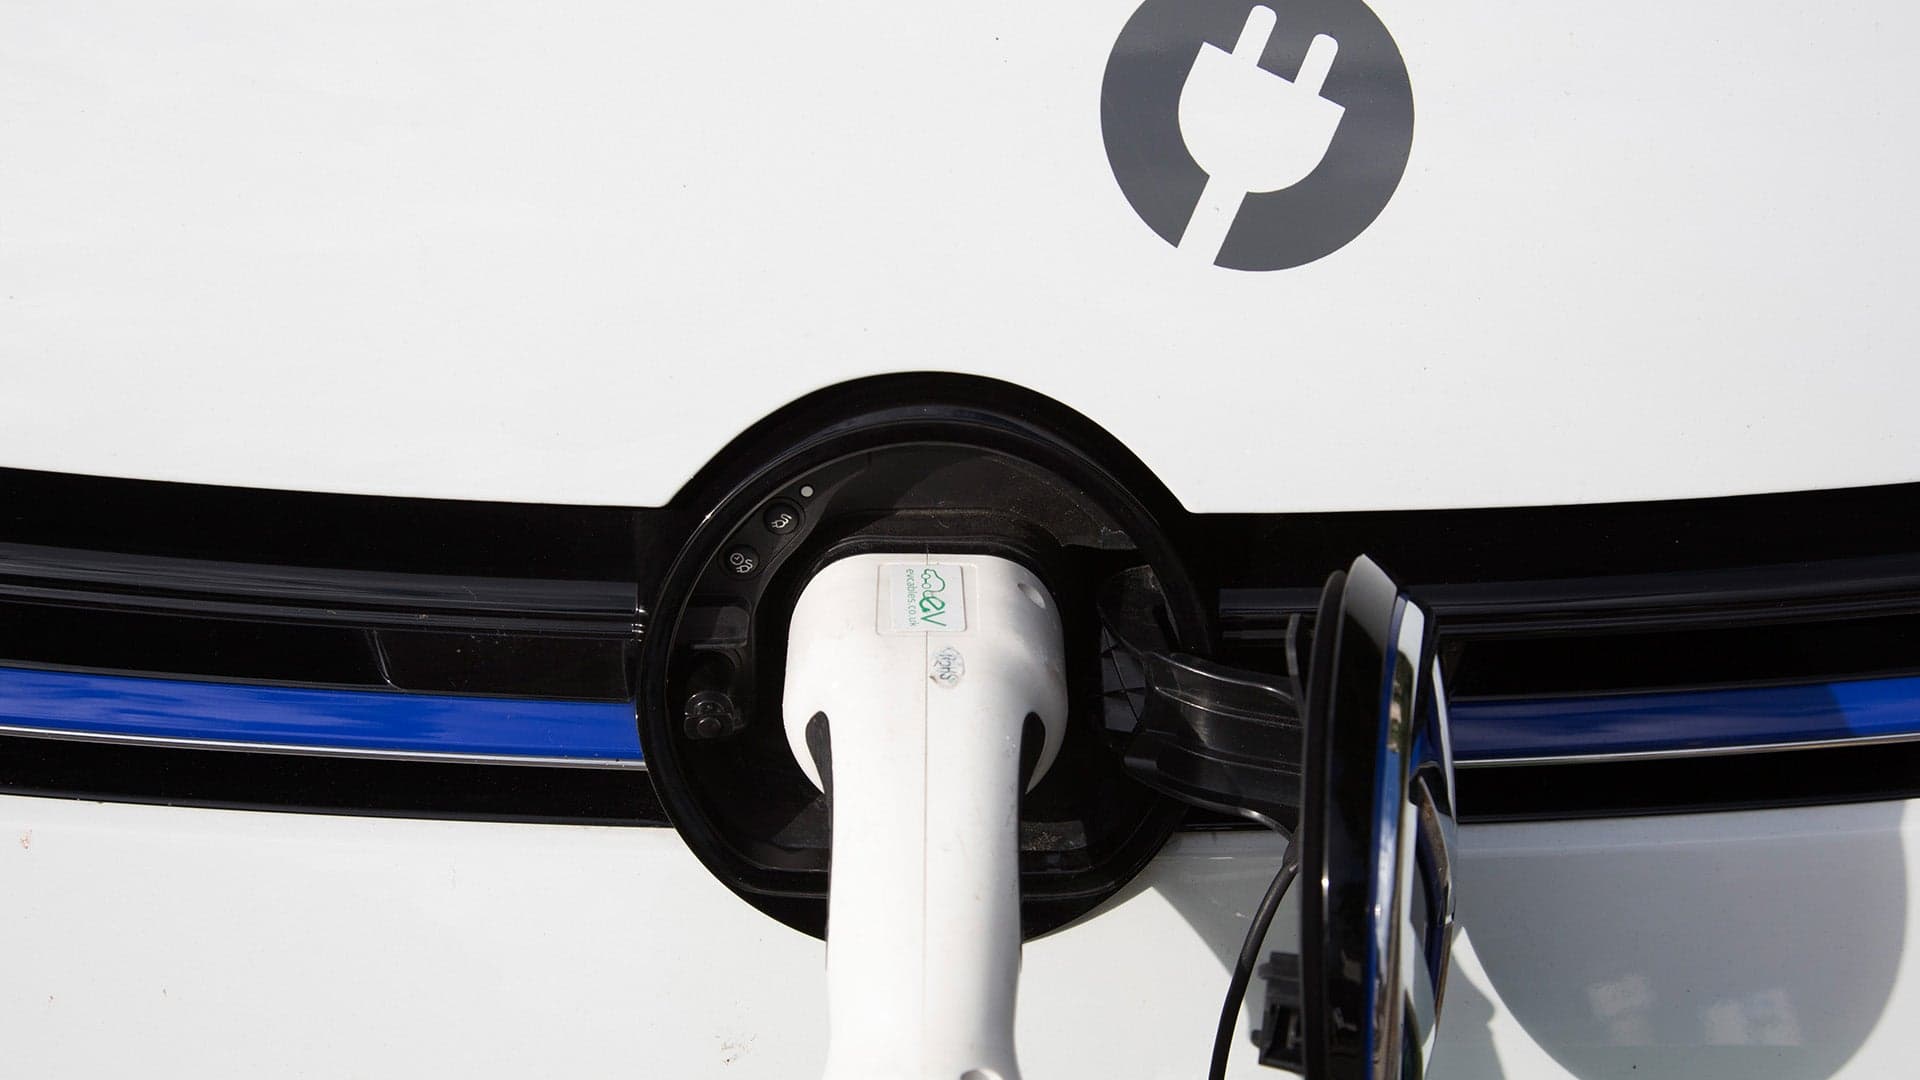 Why Are Electric Cars and Public Charging Like Hot Dogs and Buns?